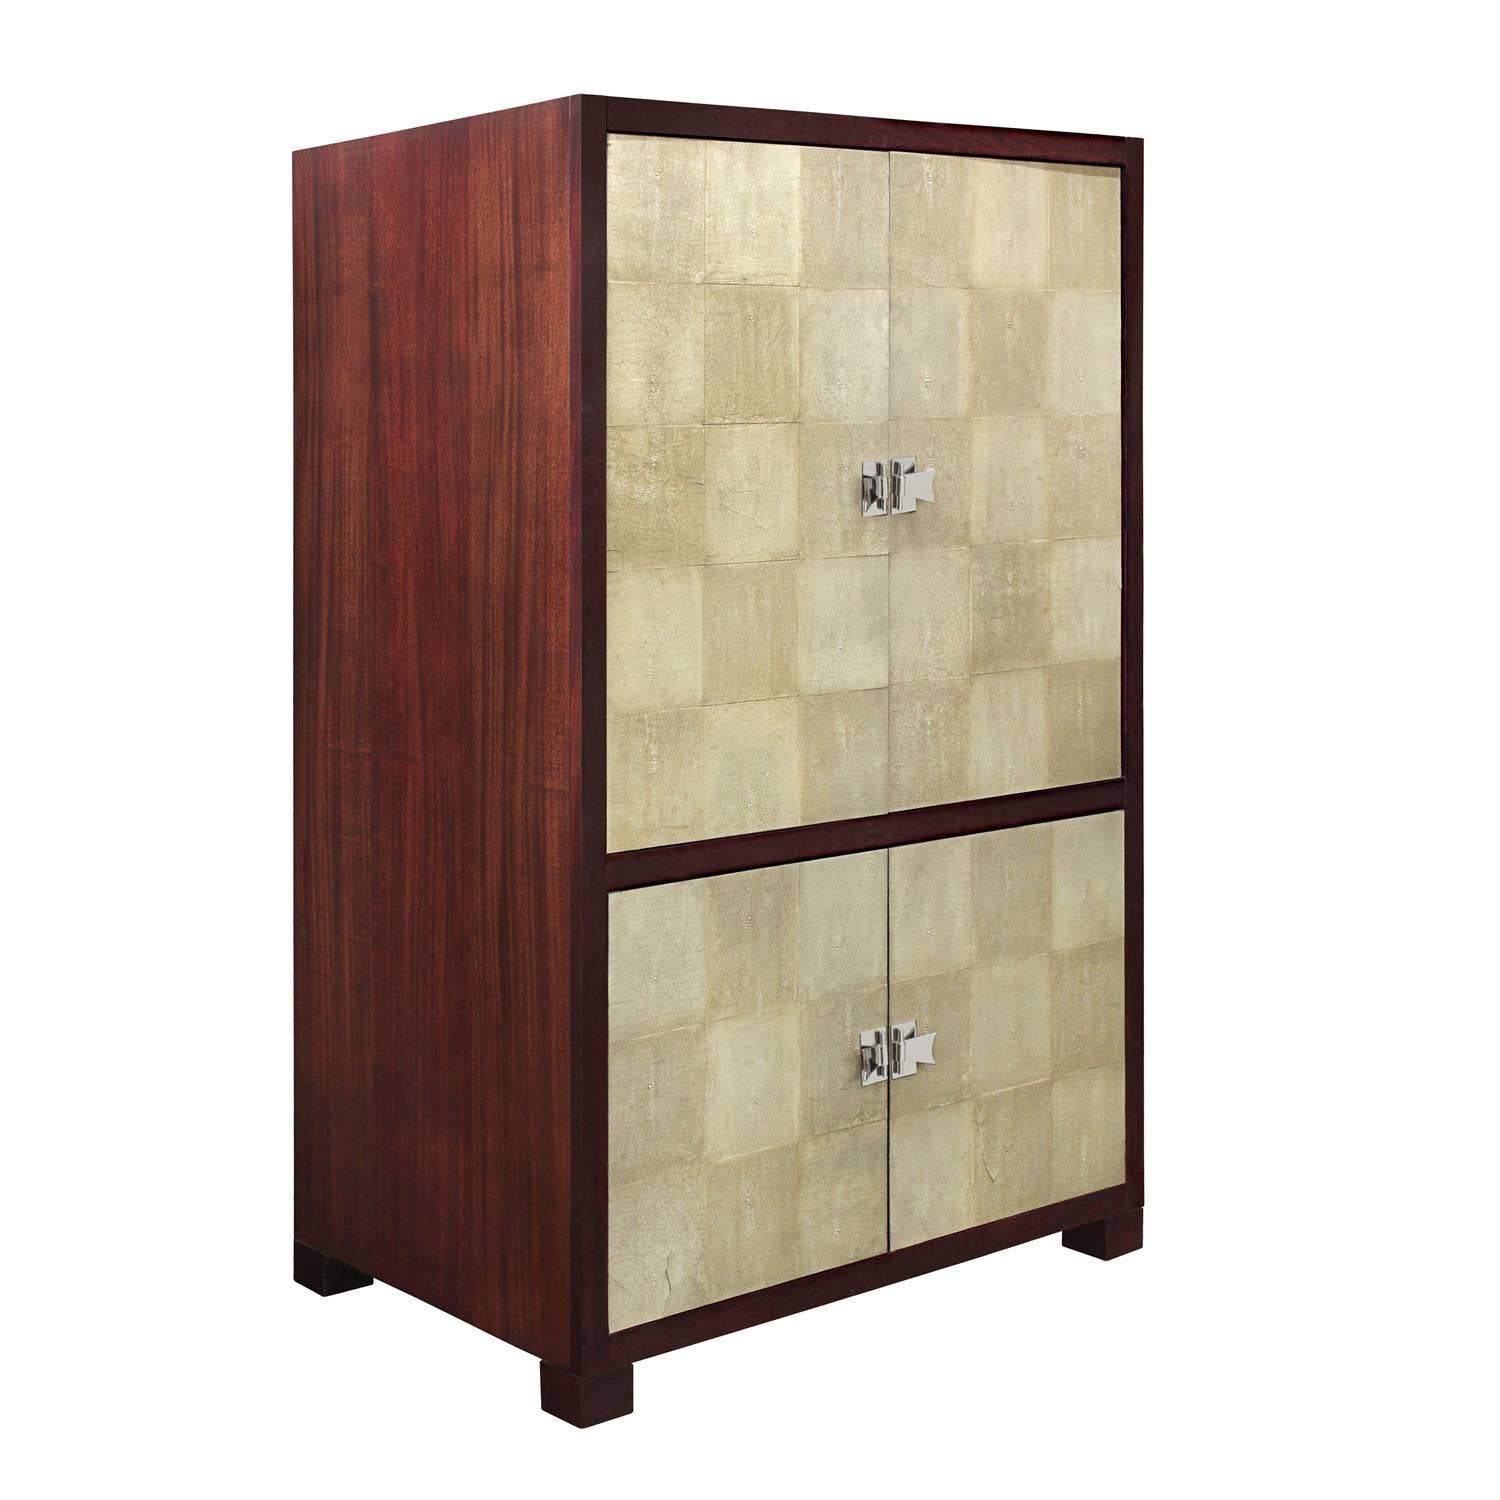 TV cabinet in mahogany with retracting doors covered in shagreen with chrome hardware by Larry Laslo for Widdicomb Furniture, American, 1980s (signed.) This can be refitted to be a wardrobe.